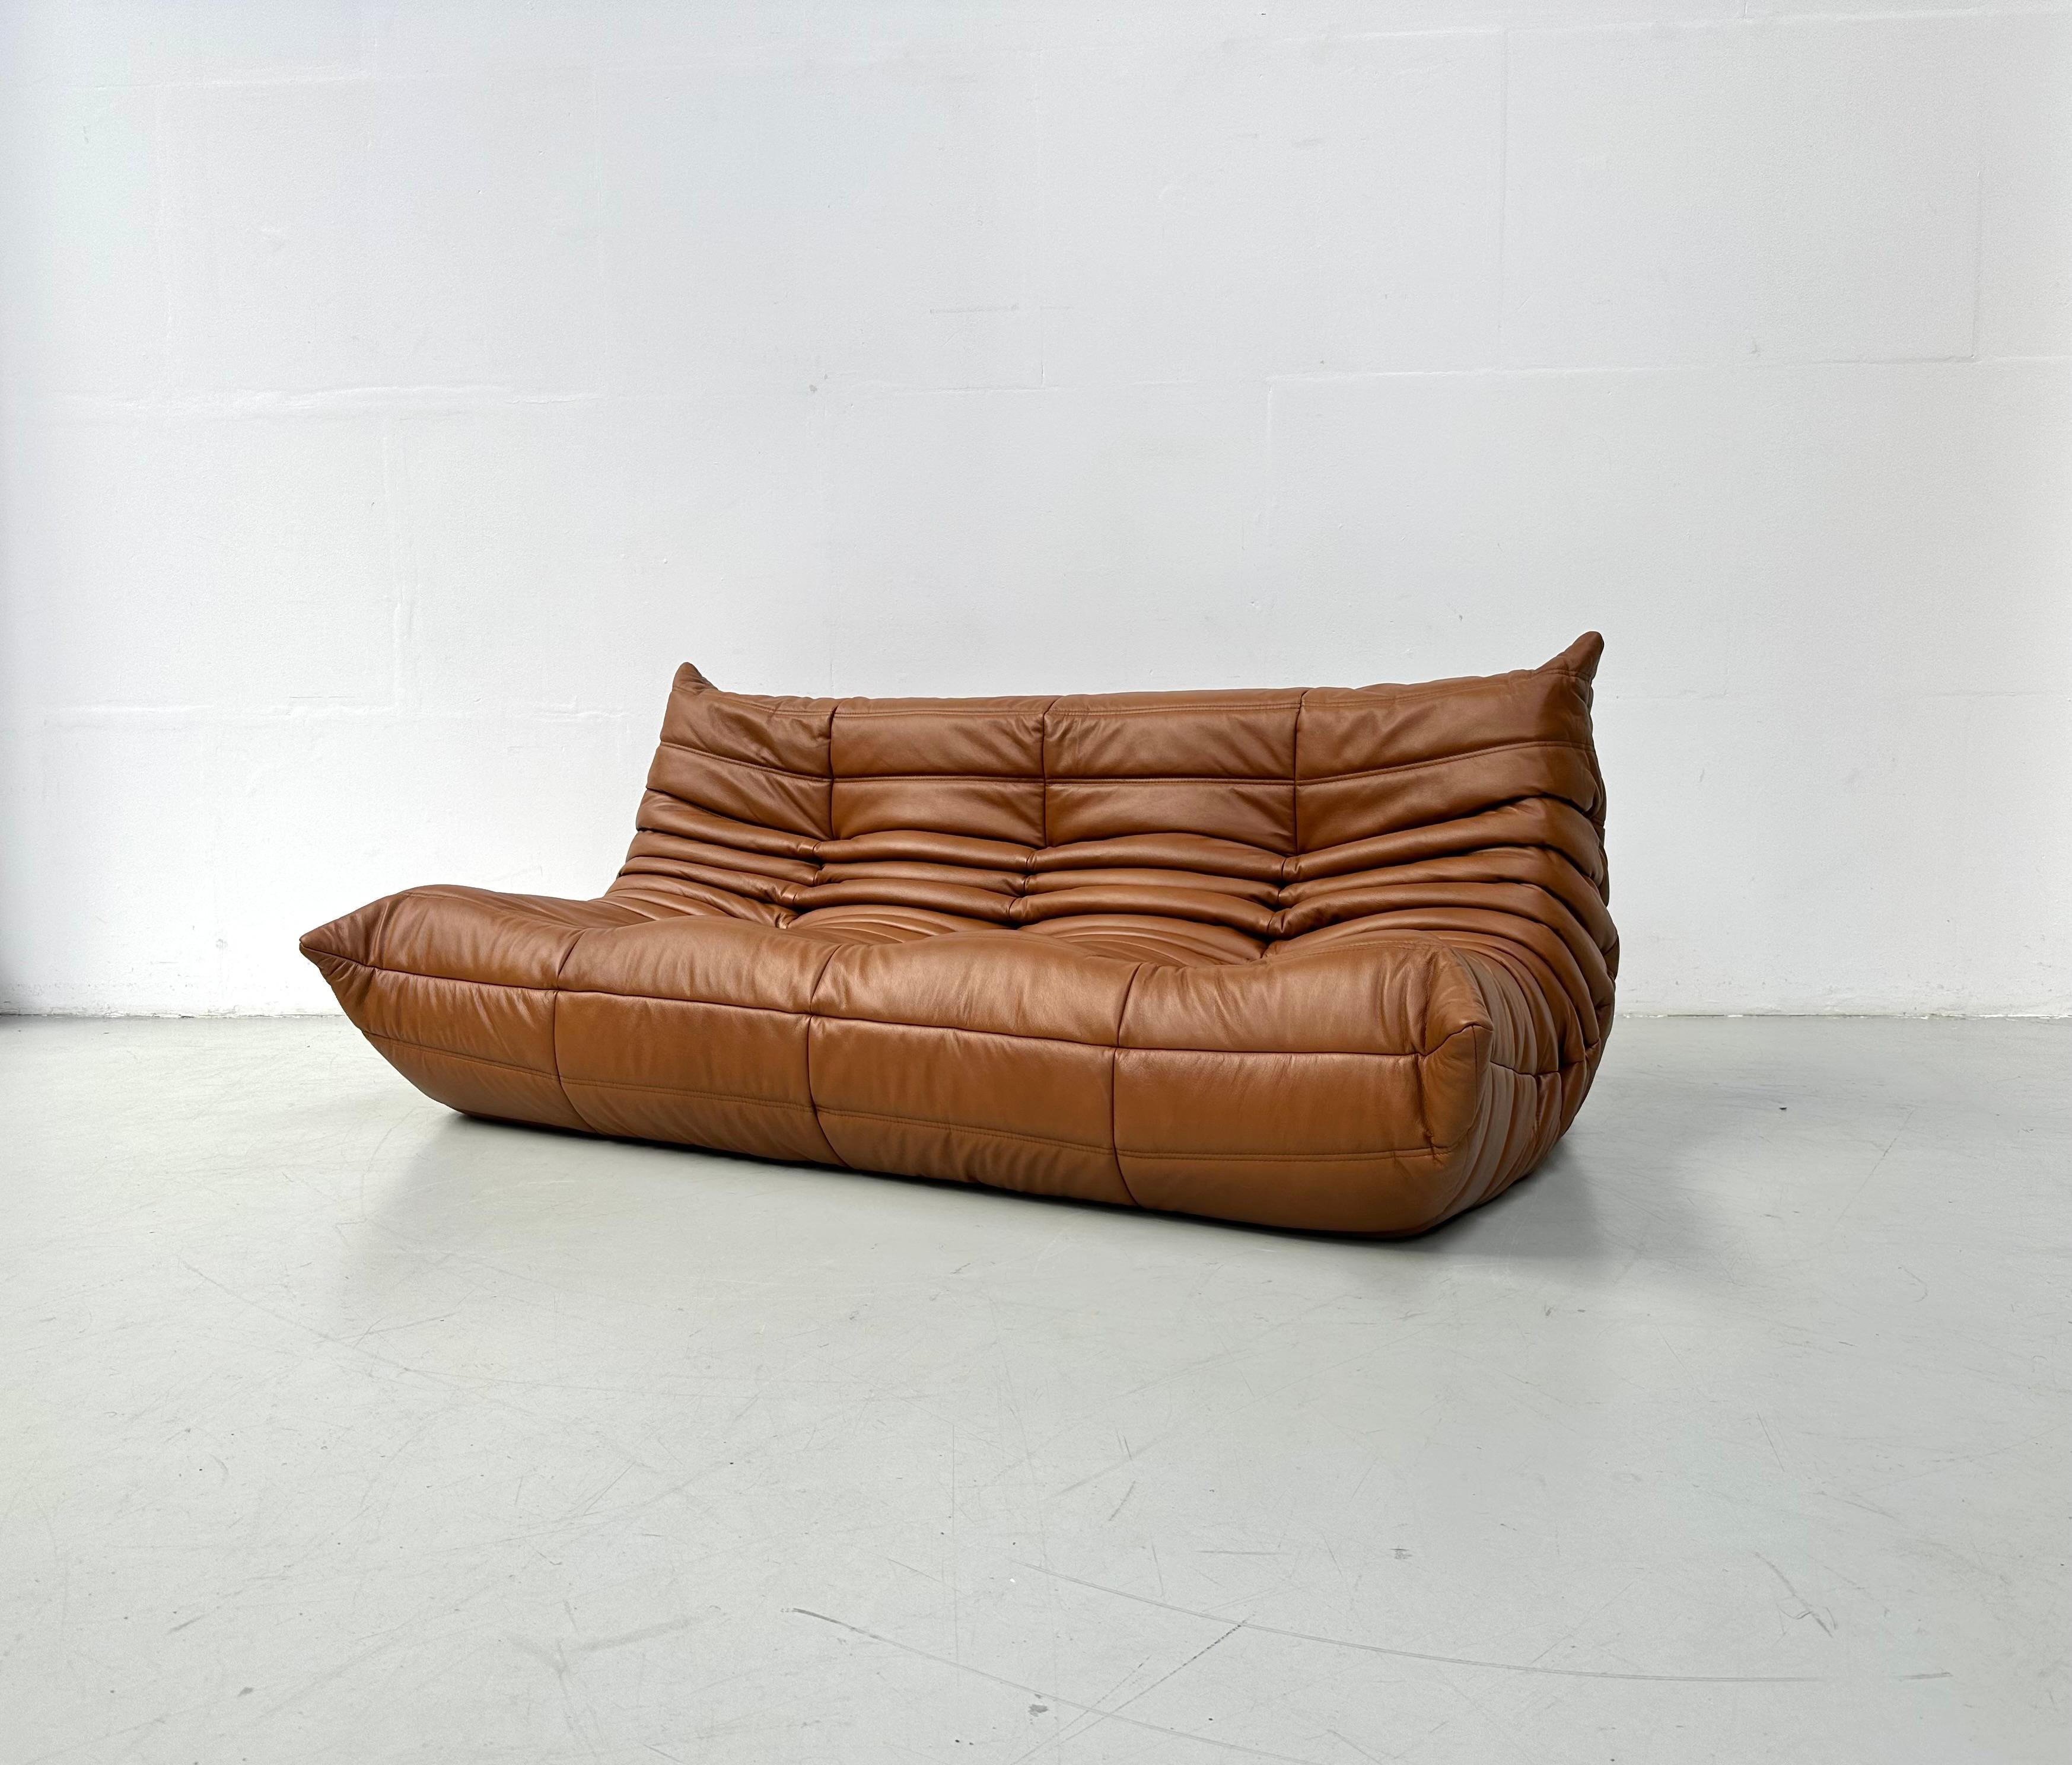 French Togo Sofa in Cognac Leather by Michel Ducaroy for Ligne Roset. In Excellent Condition For Sale In Eindhoven, Noord Brabant